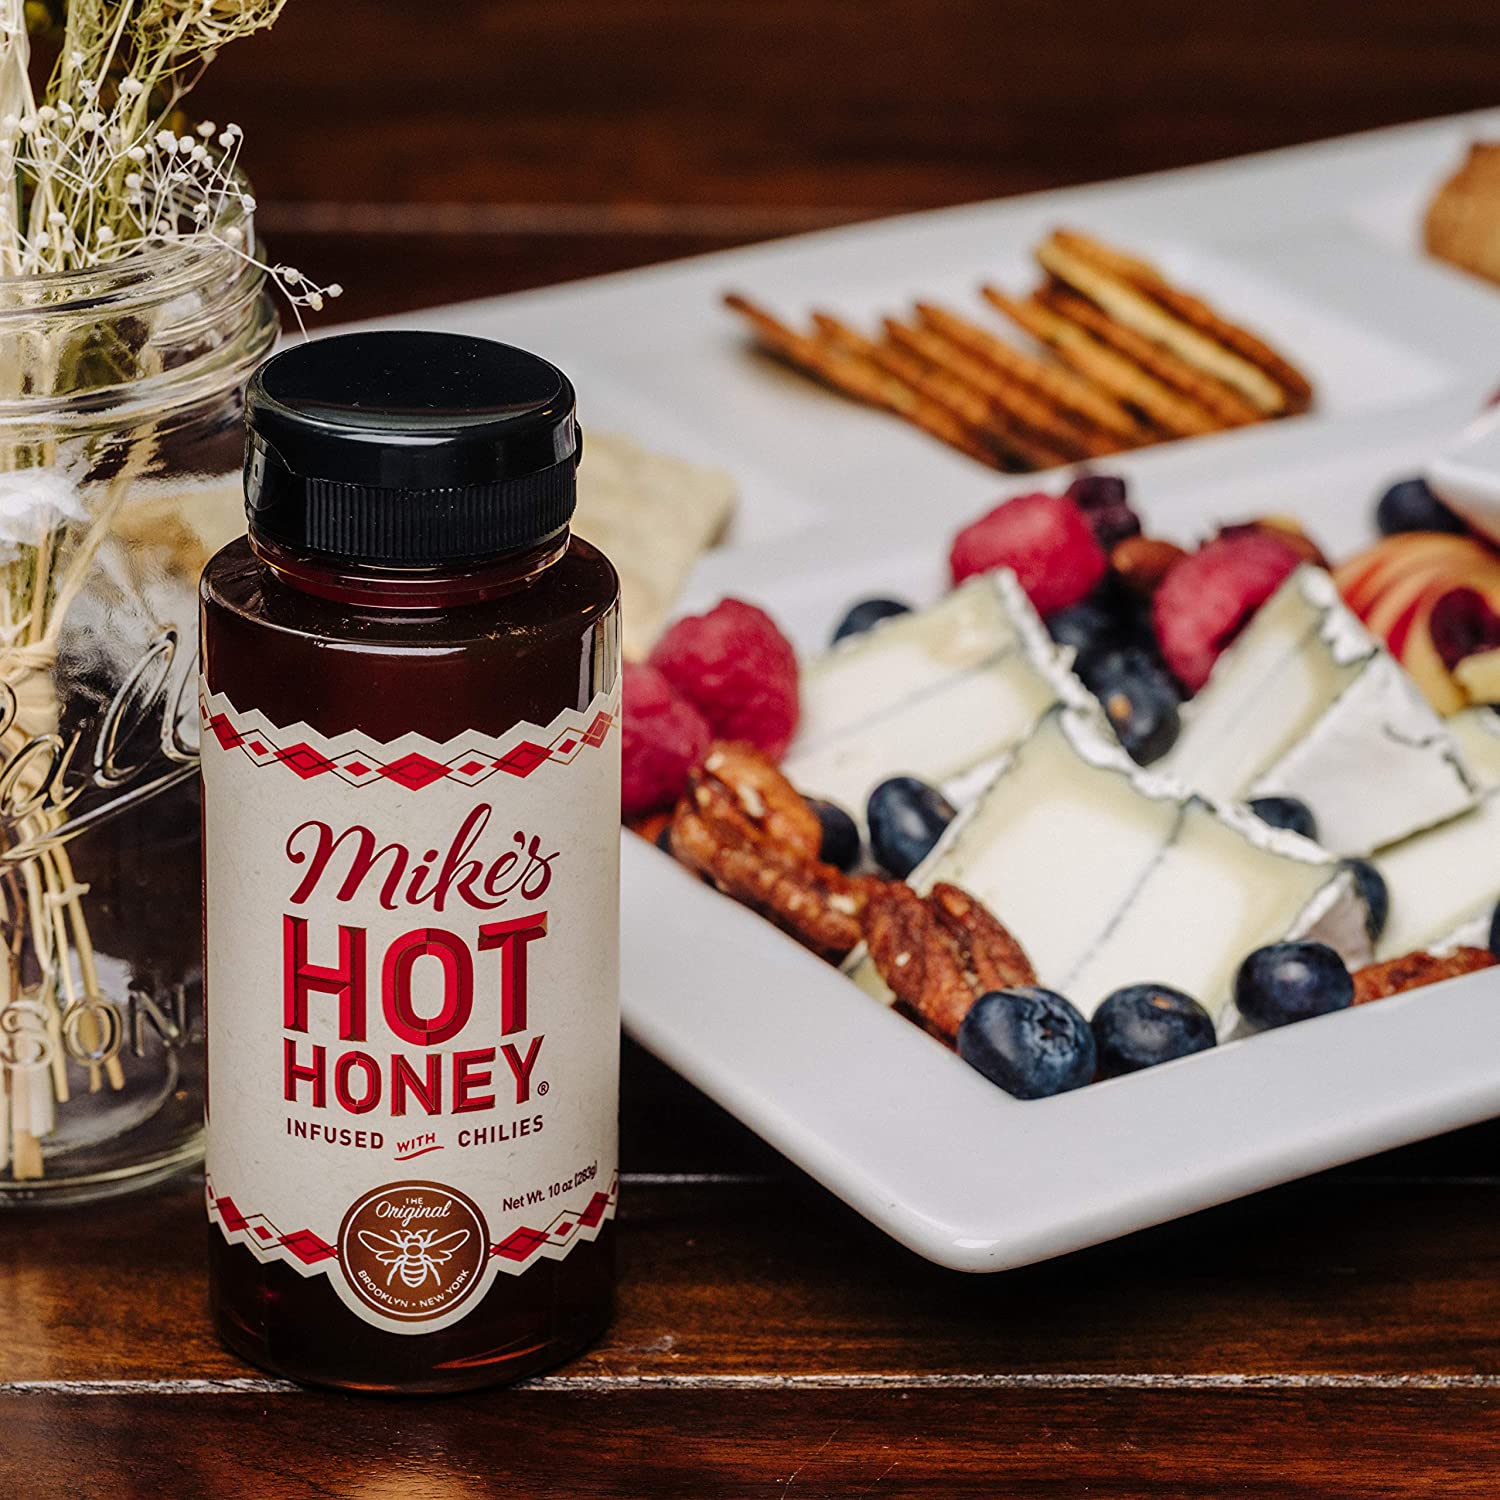 A bottle of Mike's hot honey is on a table next to a platter filled with cheese and cracker.